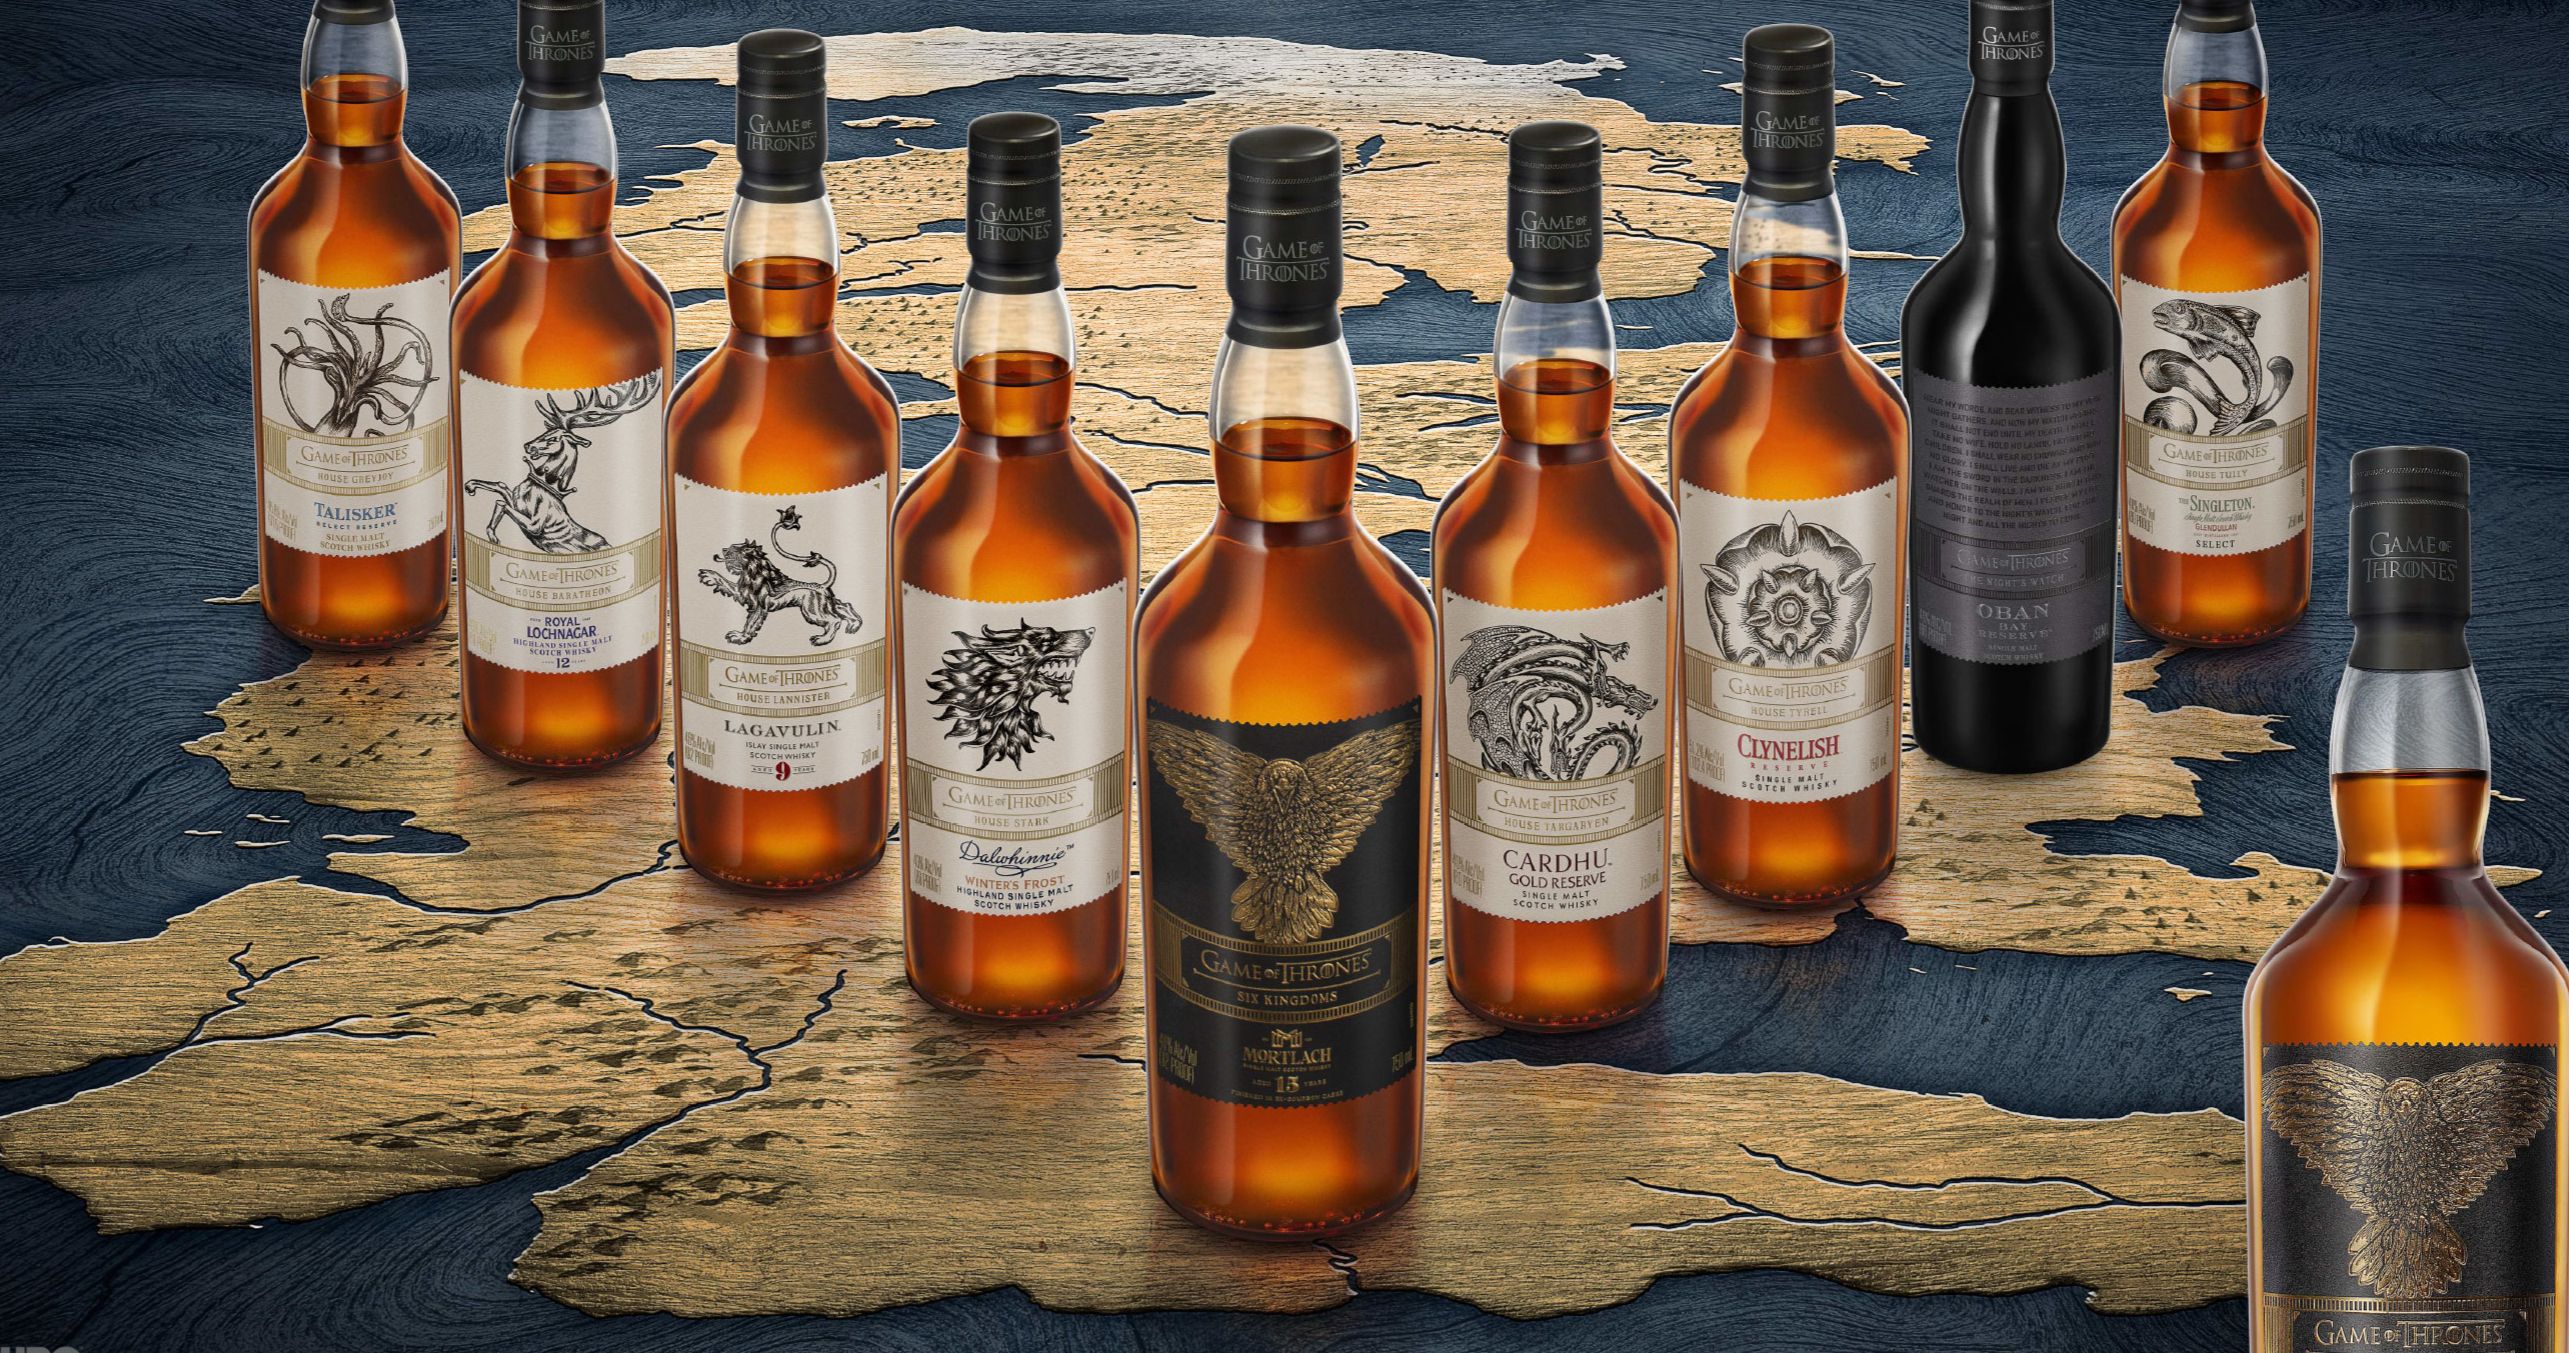 Game of Thrones Six Kingdoms Whisky Honors the Series' Epic Legacy